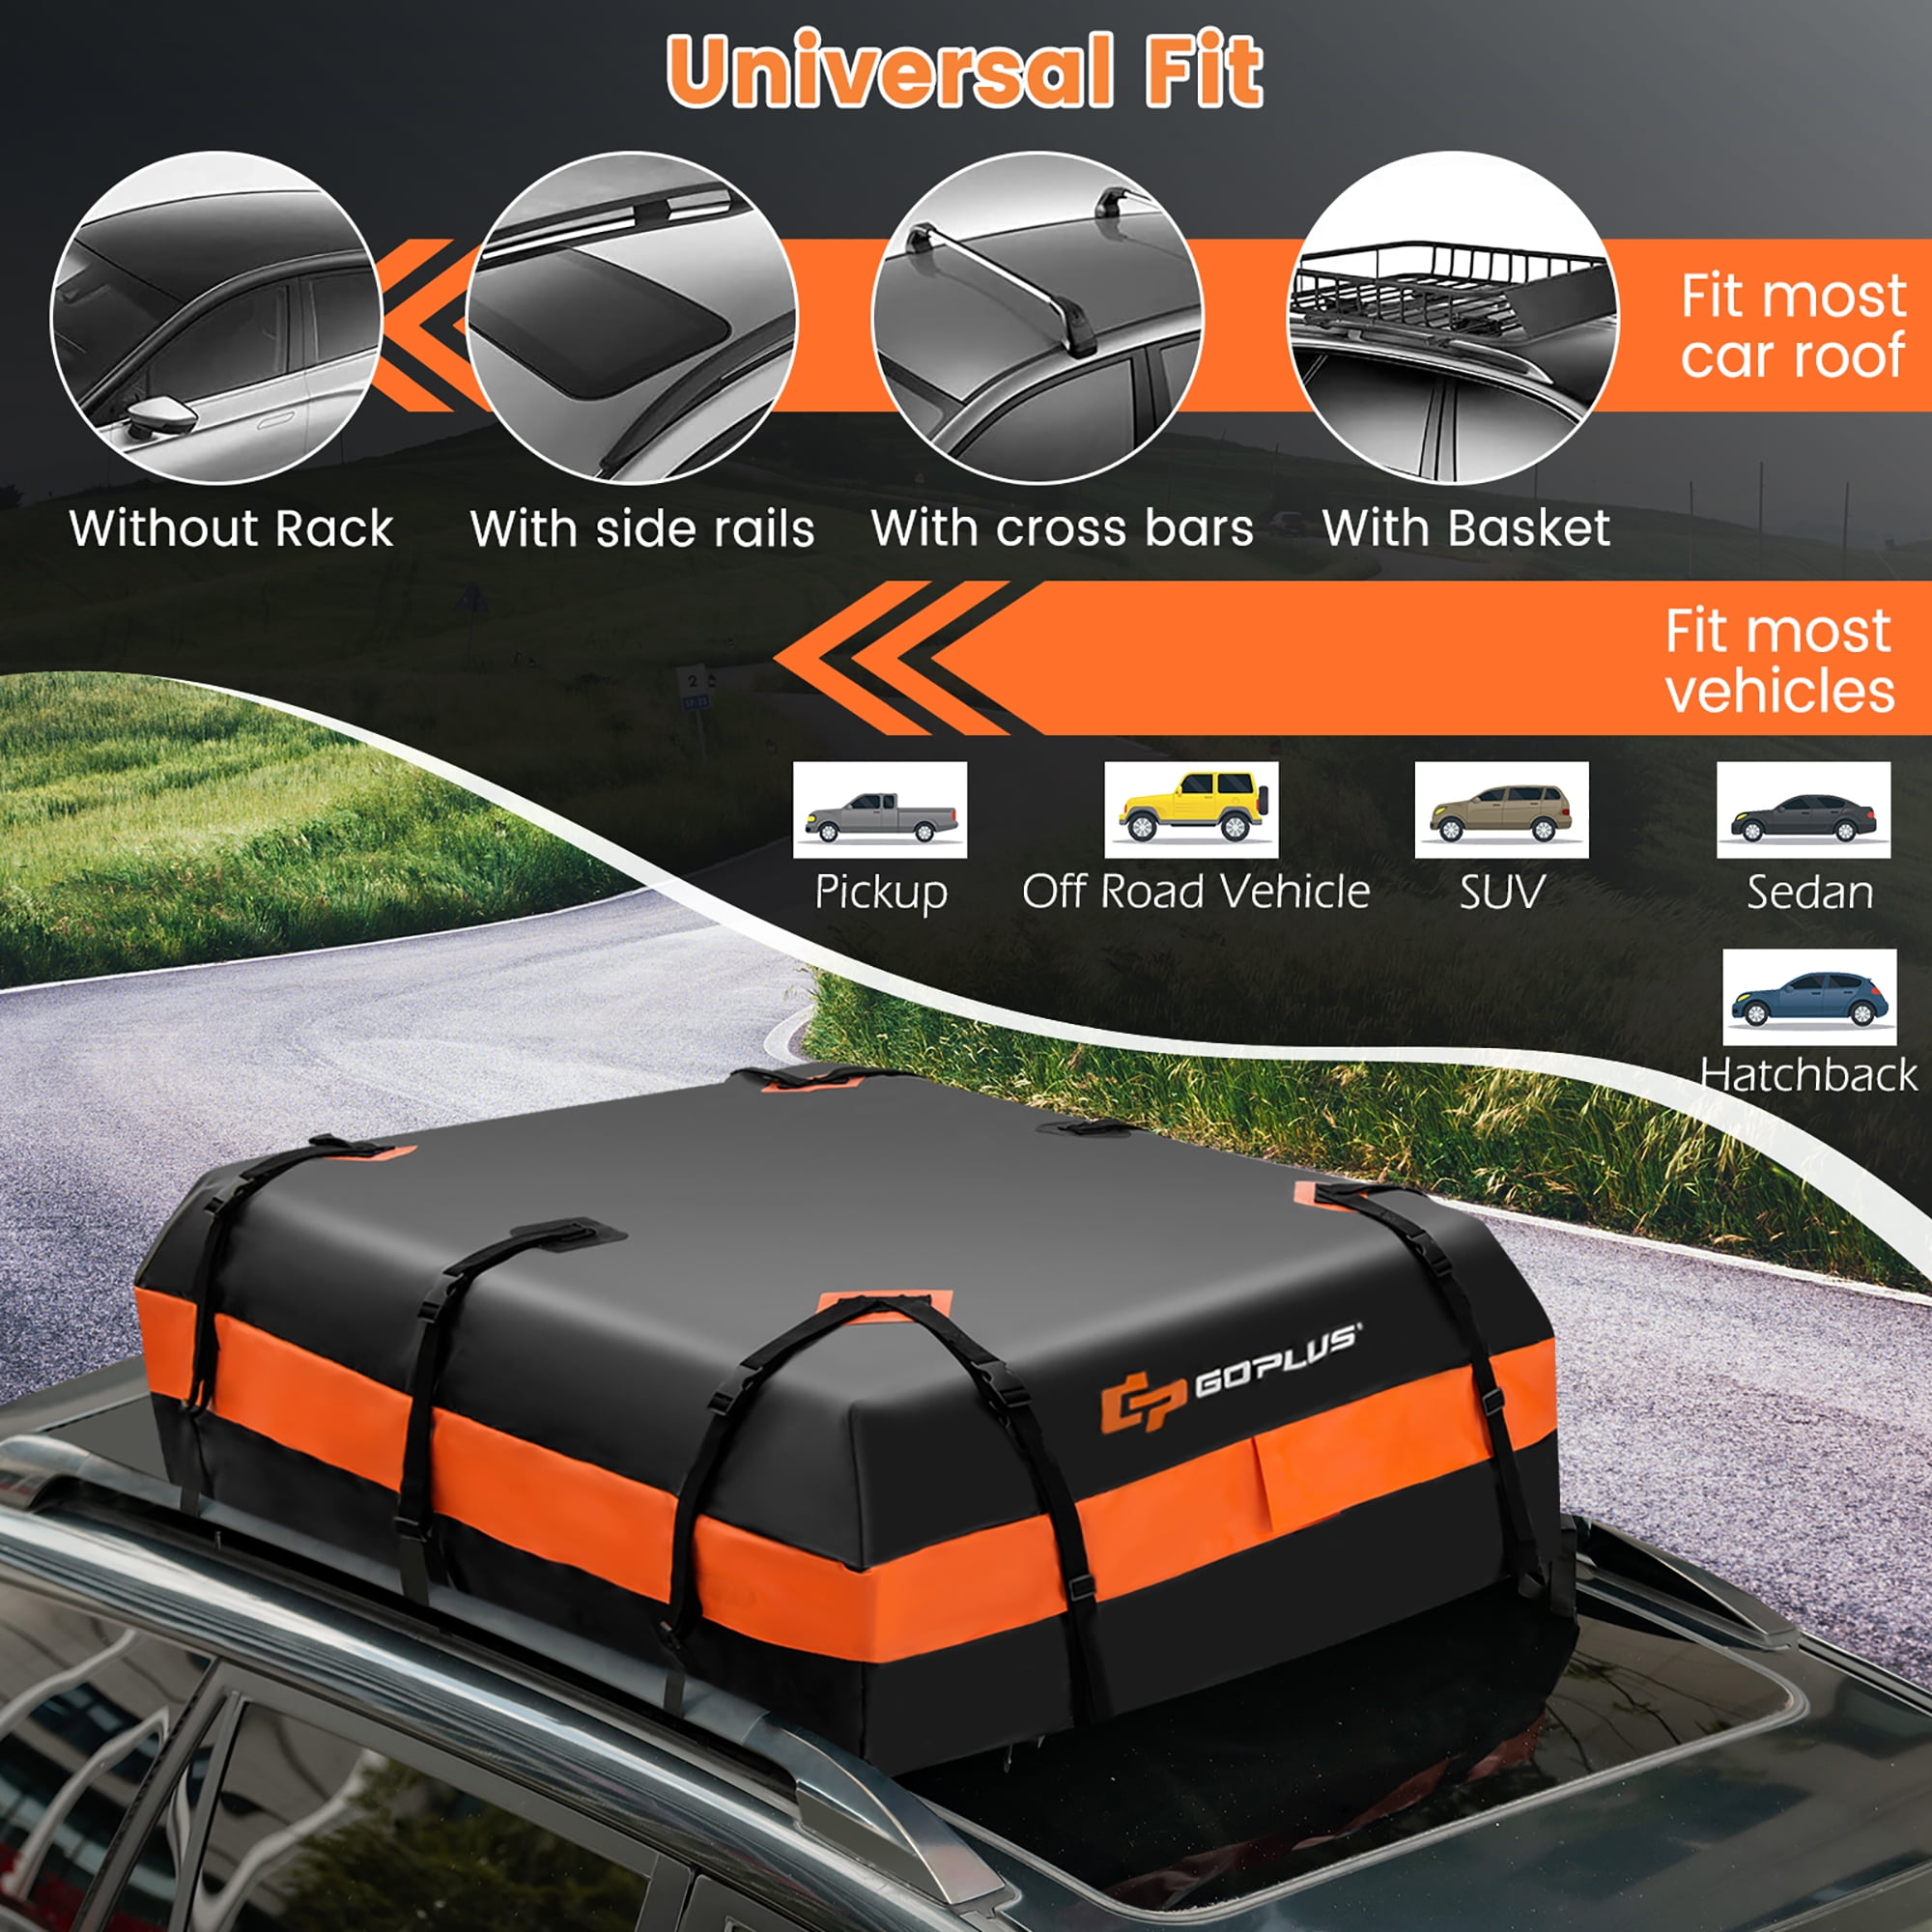 Jojoy Lux Car Rooftop Cargo Carrier Bag, 15 Cubic Feet Waterproof Heavy Duty 720D Car Roof Luggage Bag for All Vehicle with/without Racks